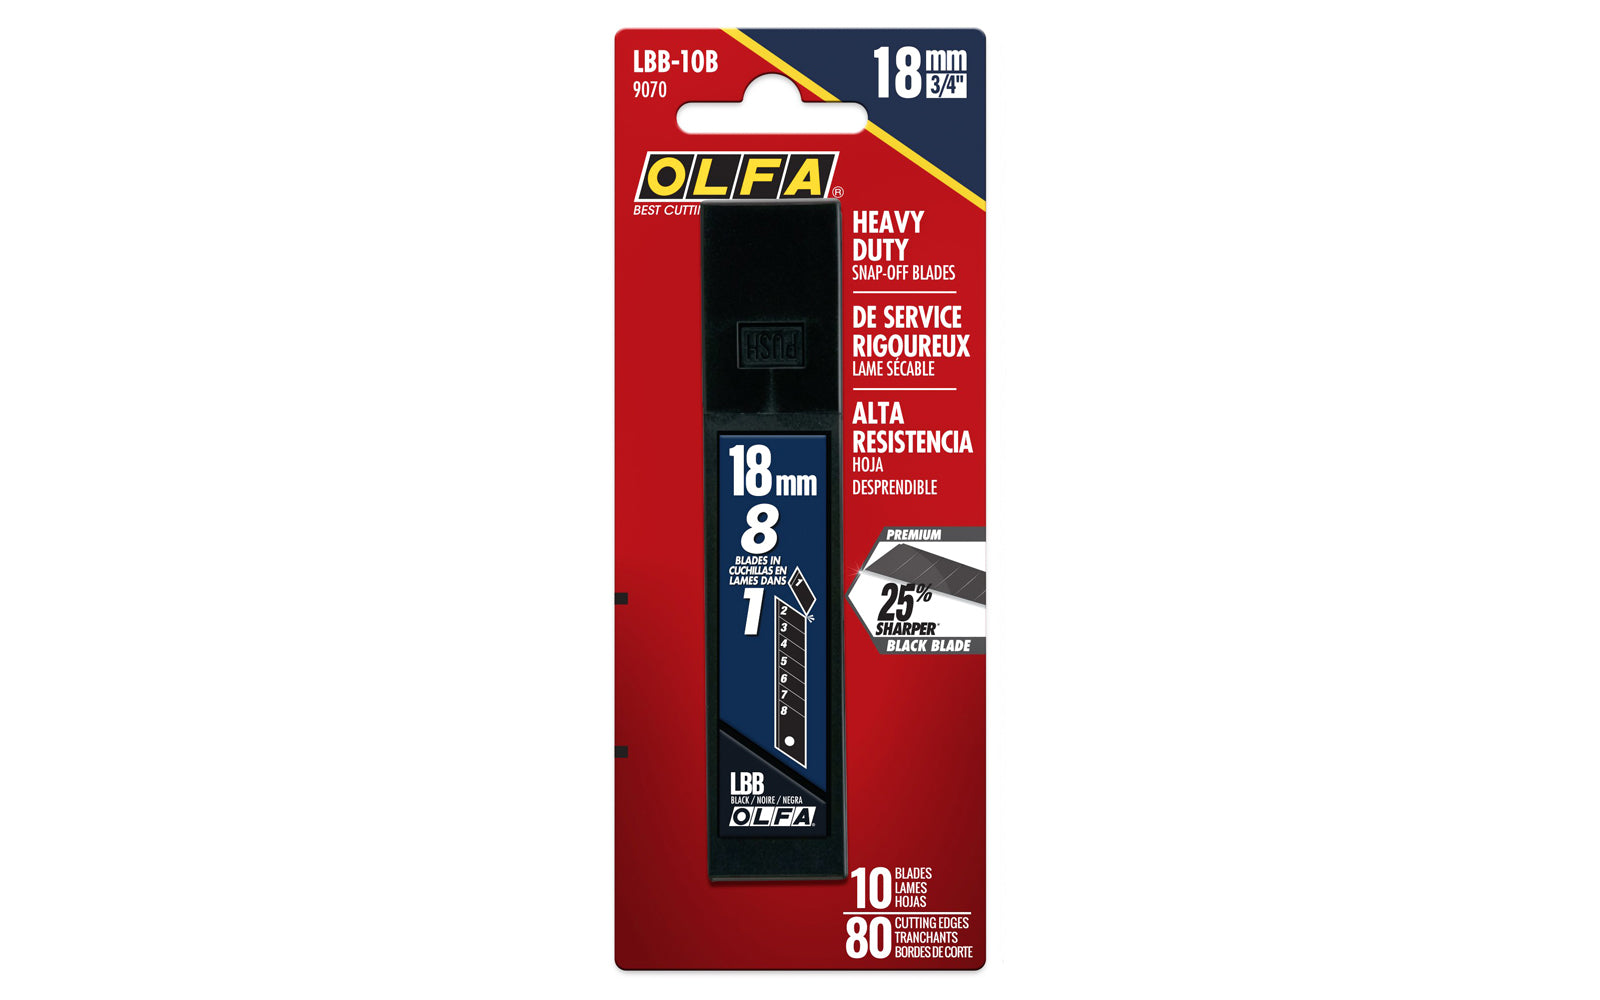 Olfa "LBB-10B" 18 mm Replacement Black Blades 10 Pack are sharper than standard silver blades by up to 25%. These heavy duty blades are made with premium carbon tool steel from Japan & are honed on both sides of the blade for professional grade cutting. 091511600360. Olfa Model LBB-10B. 10 Blades in Pack. Made in Japan